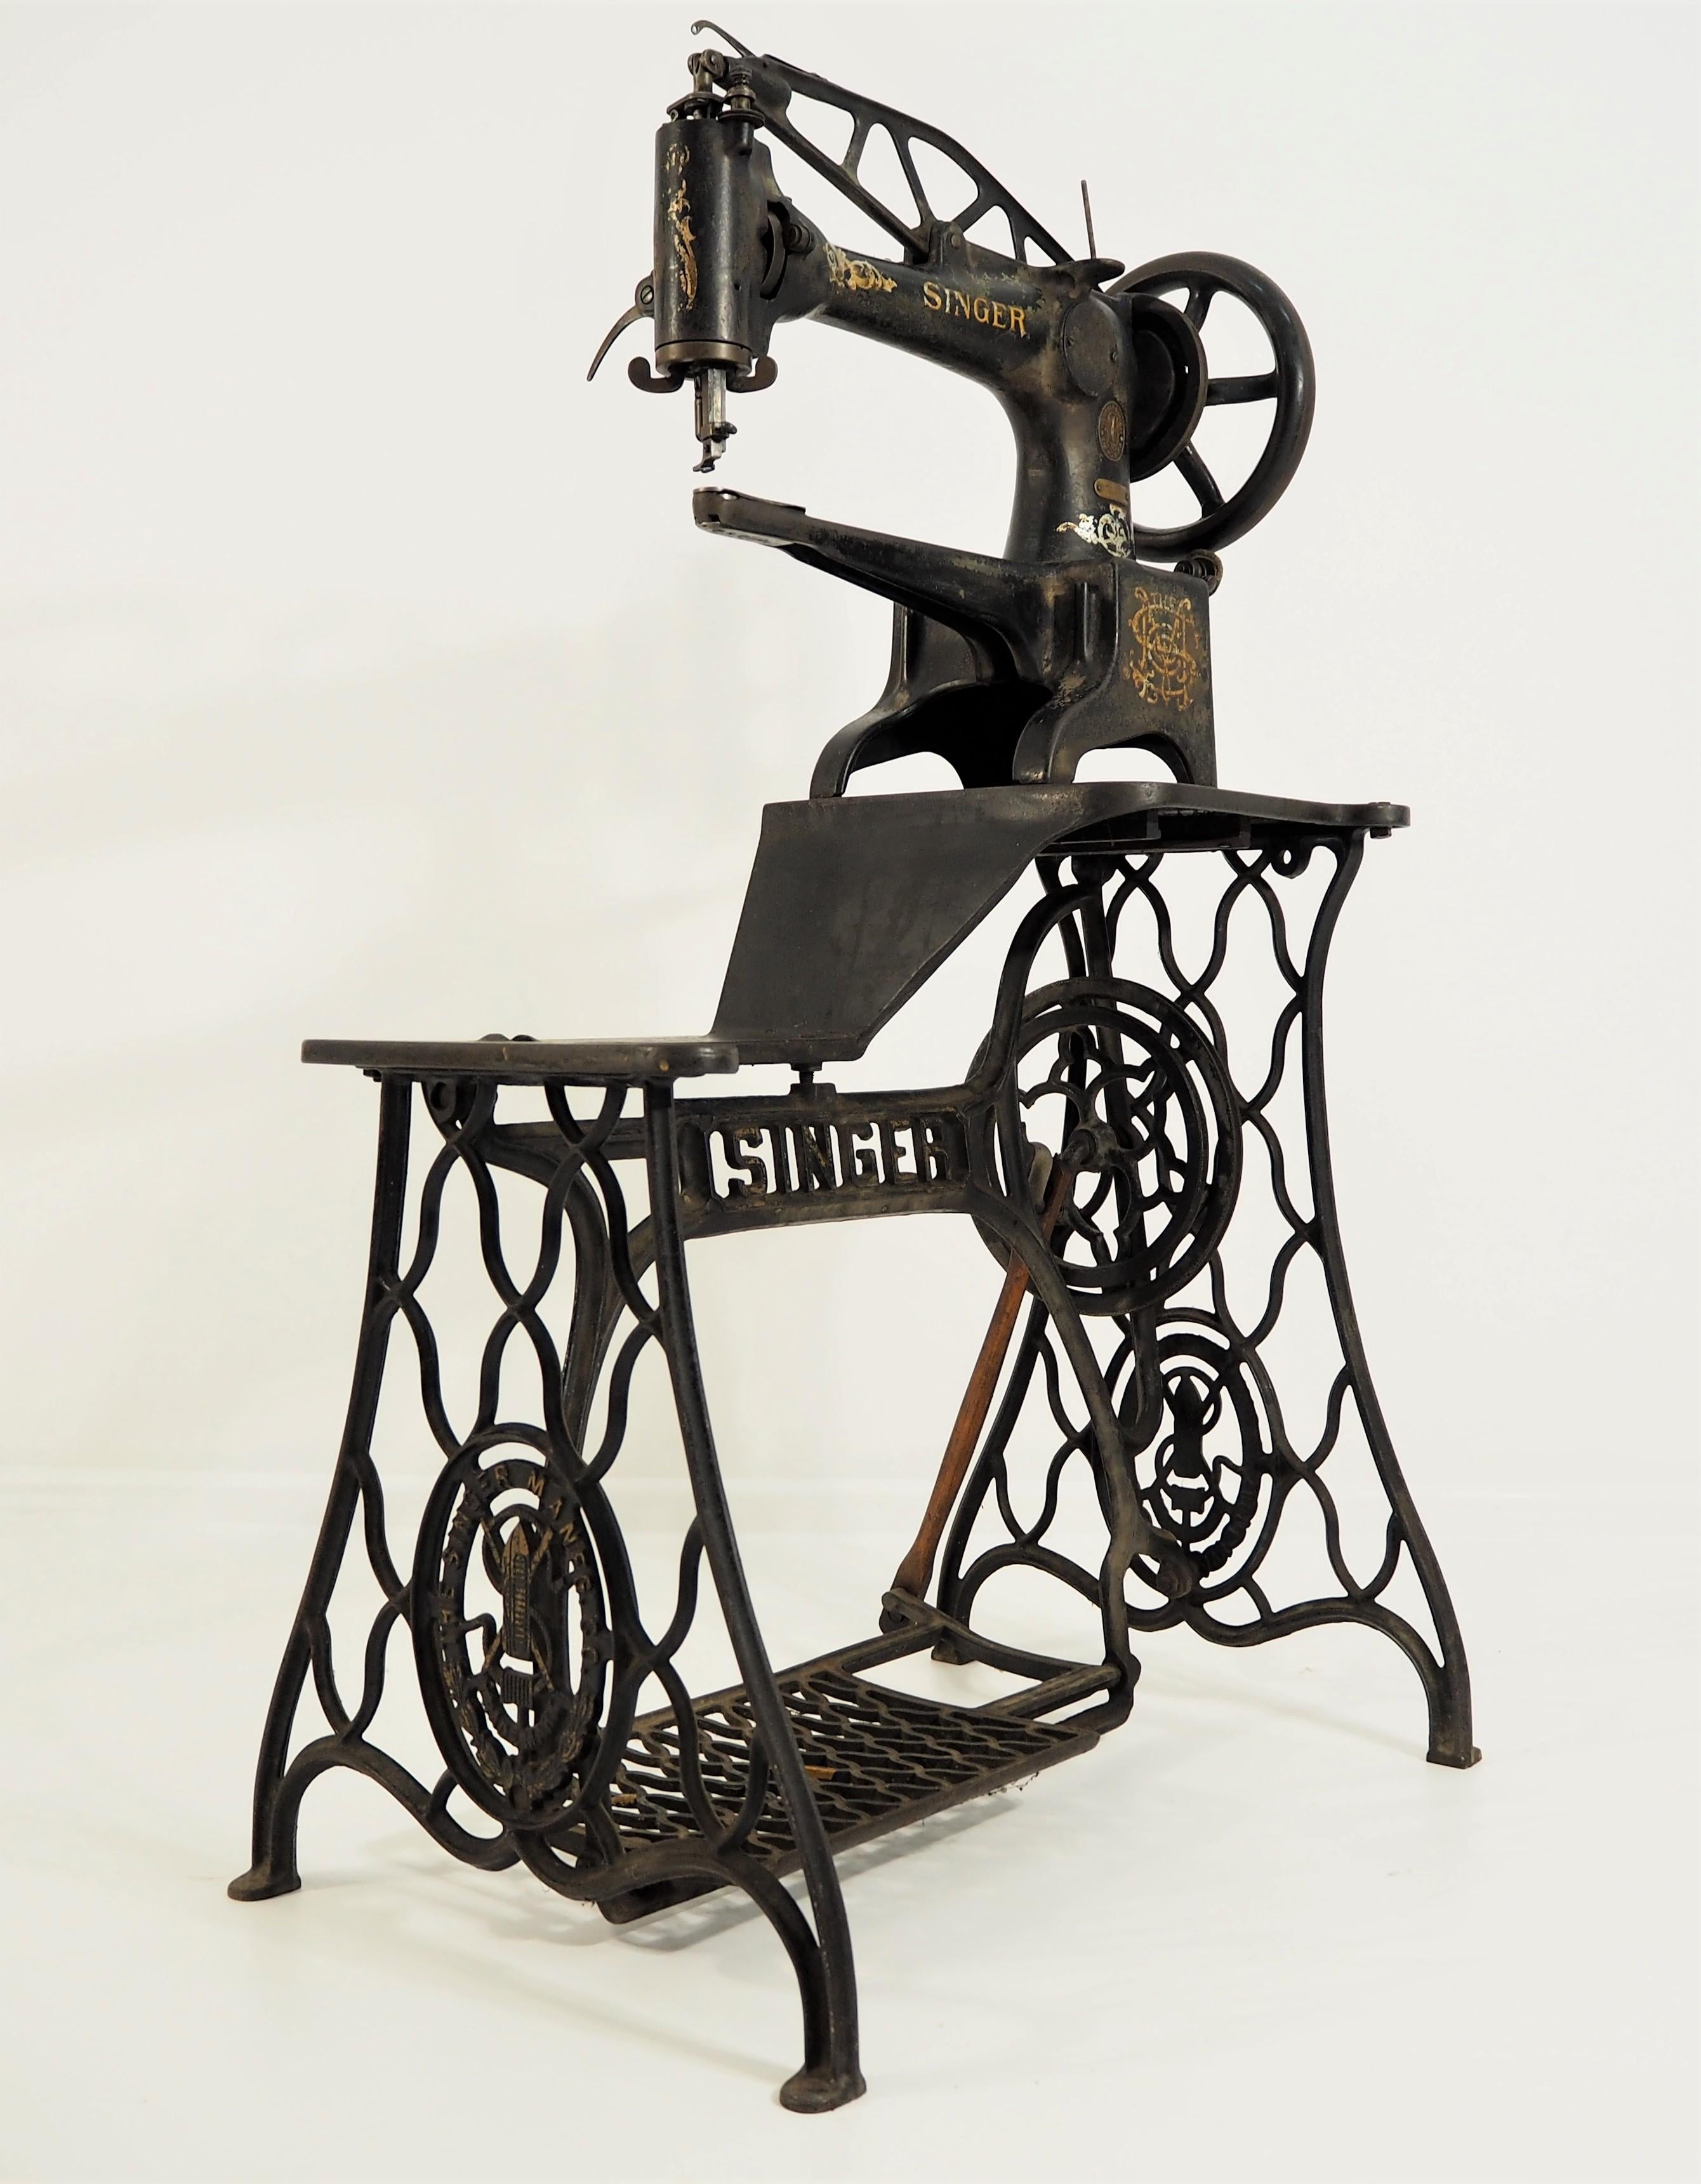 Steel Sewing Machine from Singer, circa 1920s